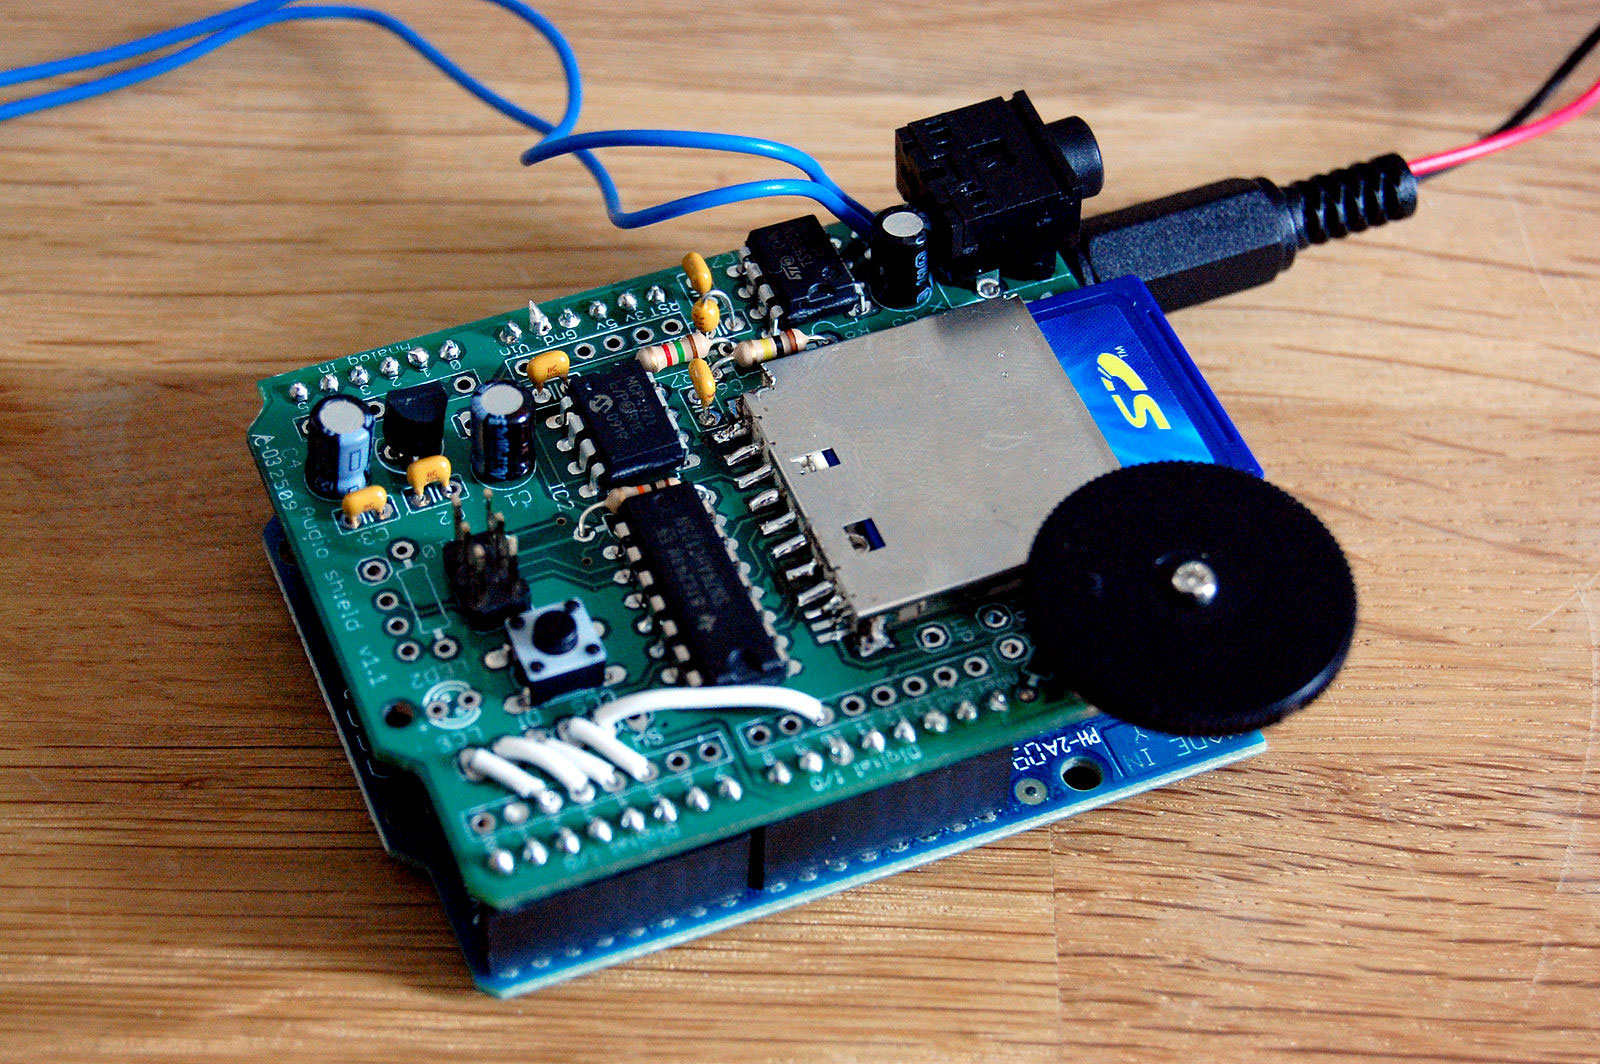 An audio player shield mounted on Arduino